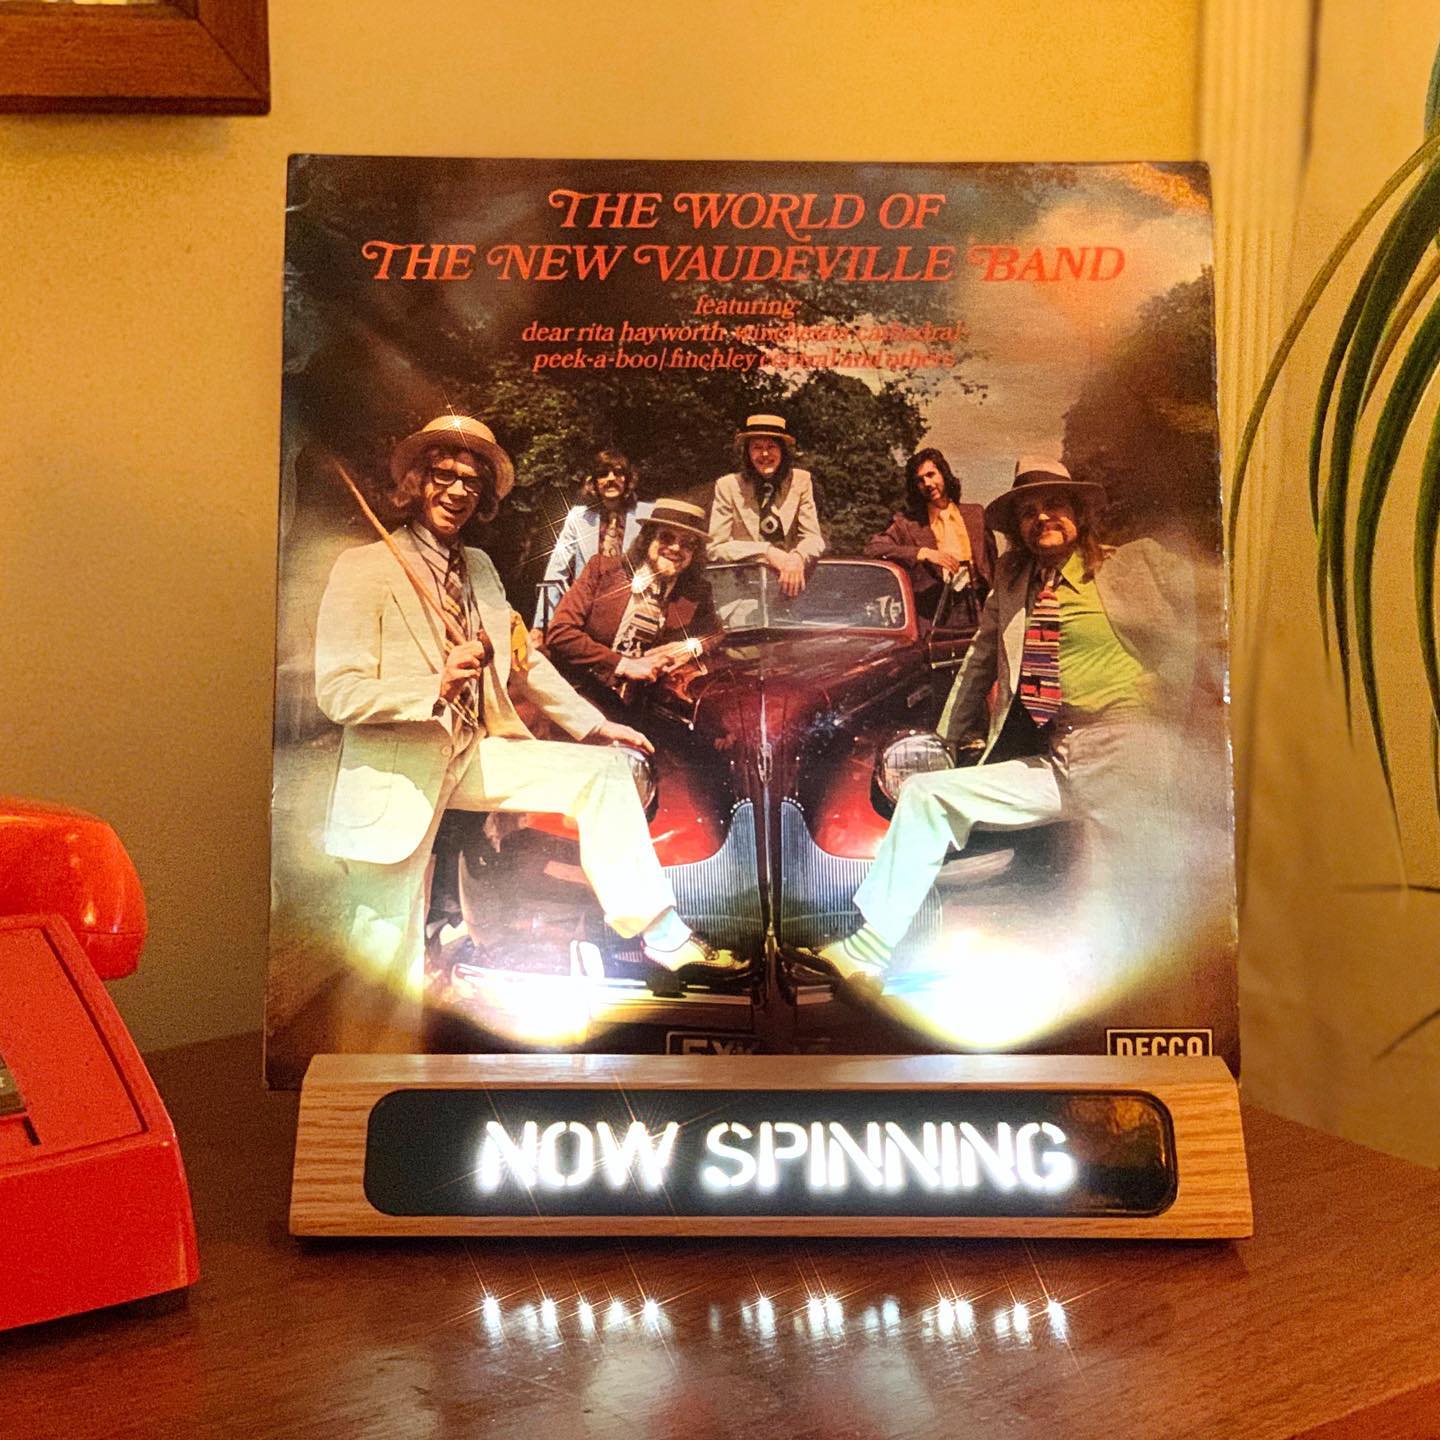 Vinyl-a-Day 20: The New Vaudeville Band - The World of the New Vaudeville Band (Decca, 1974)